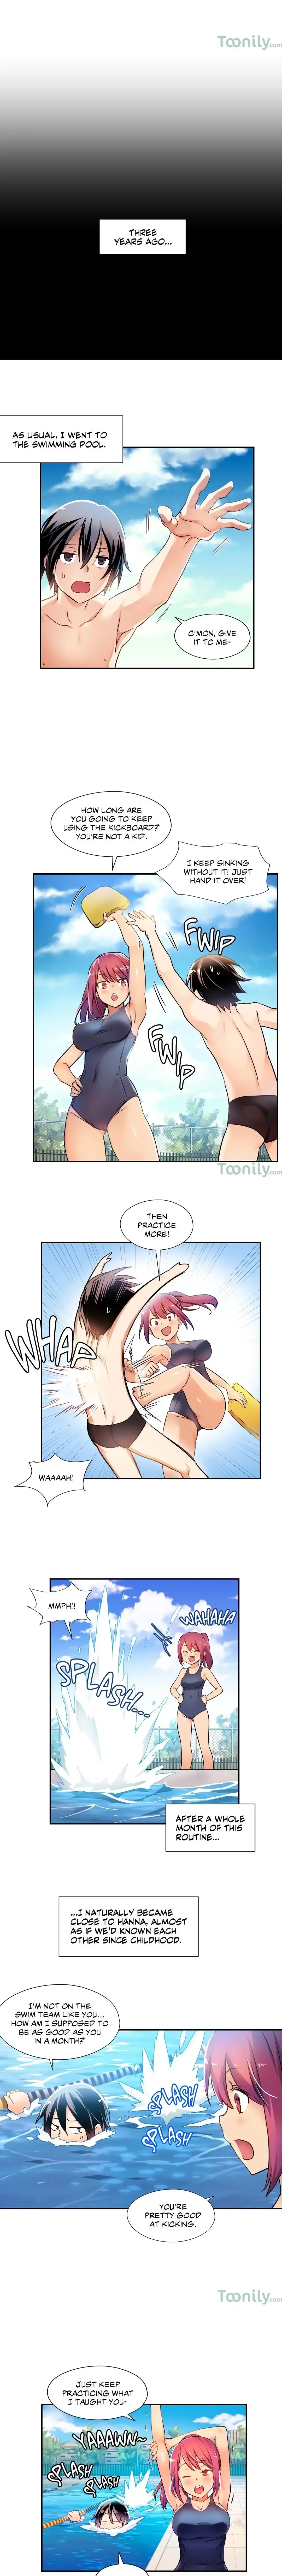 under-observation-my-first-loves-and-i-chap-4-2